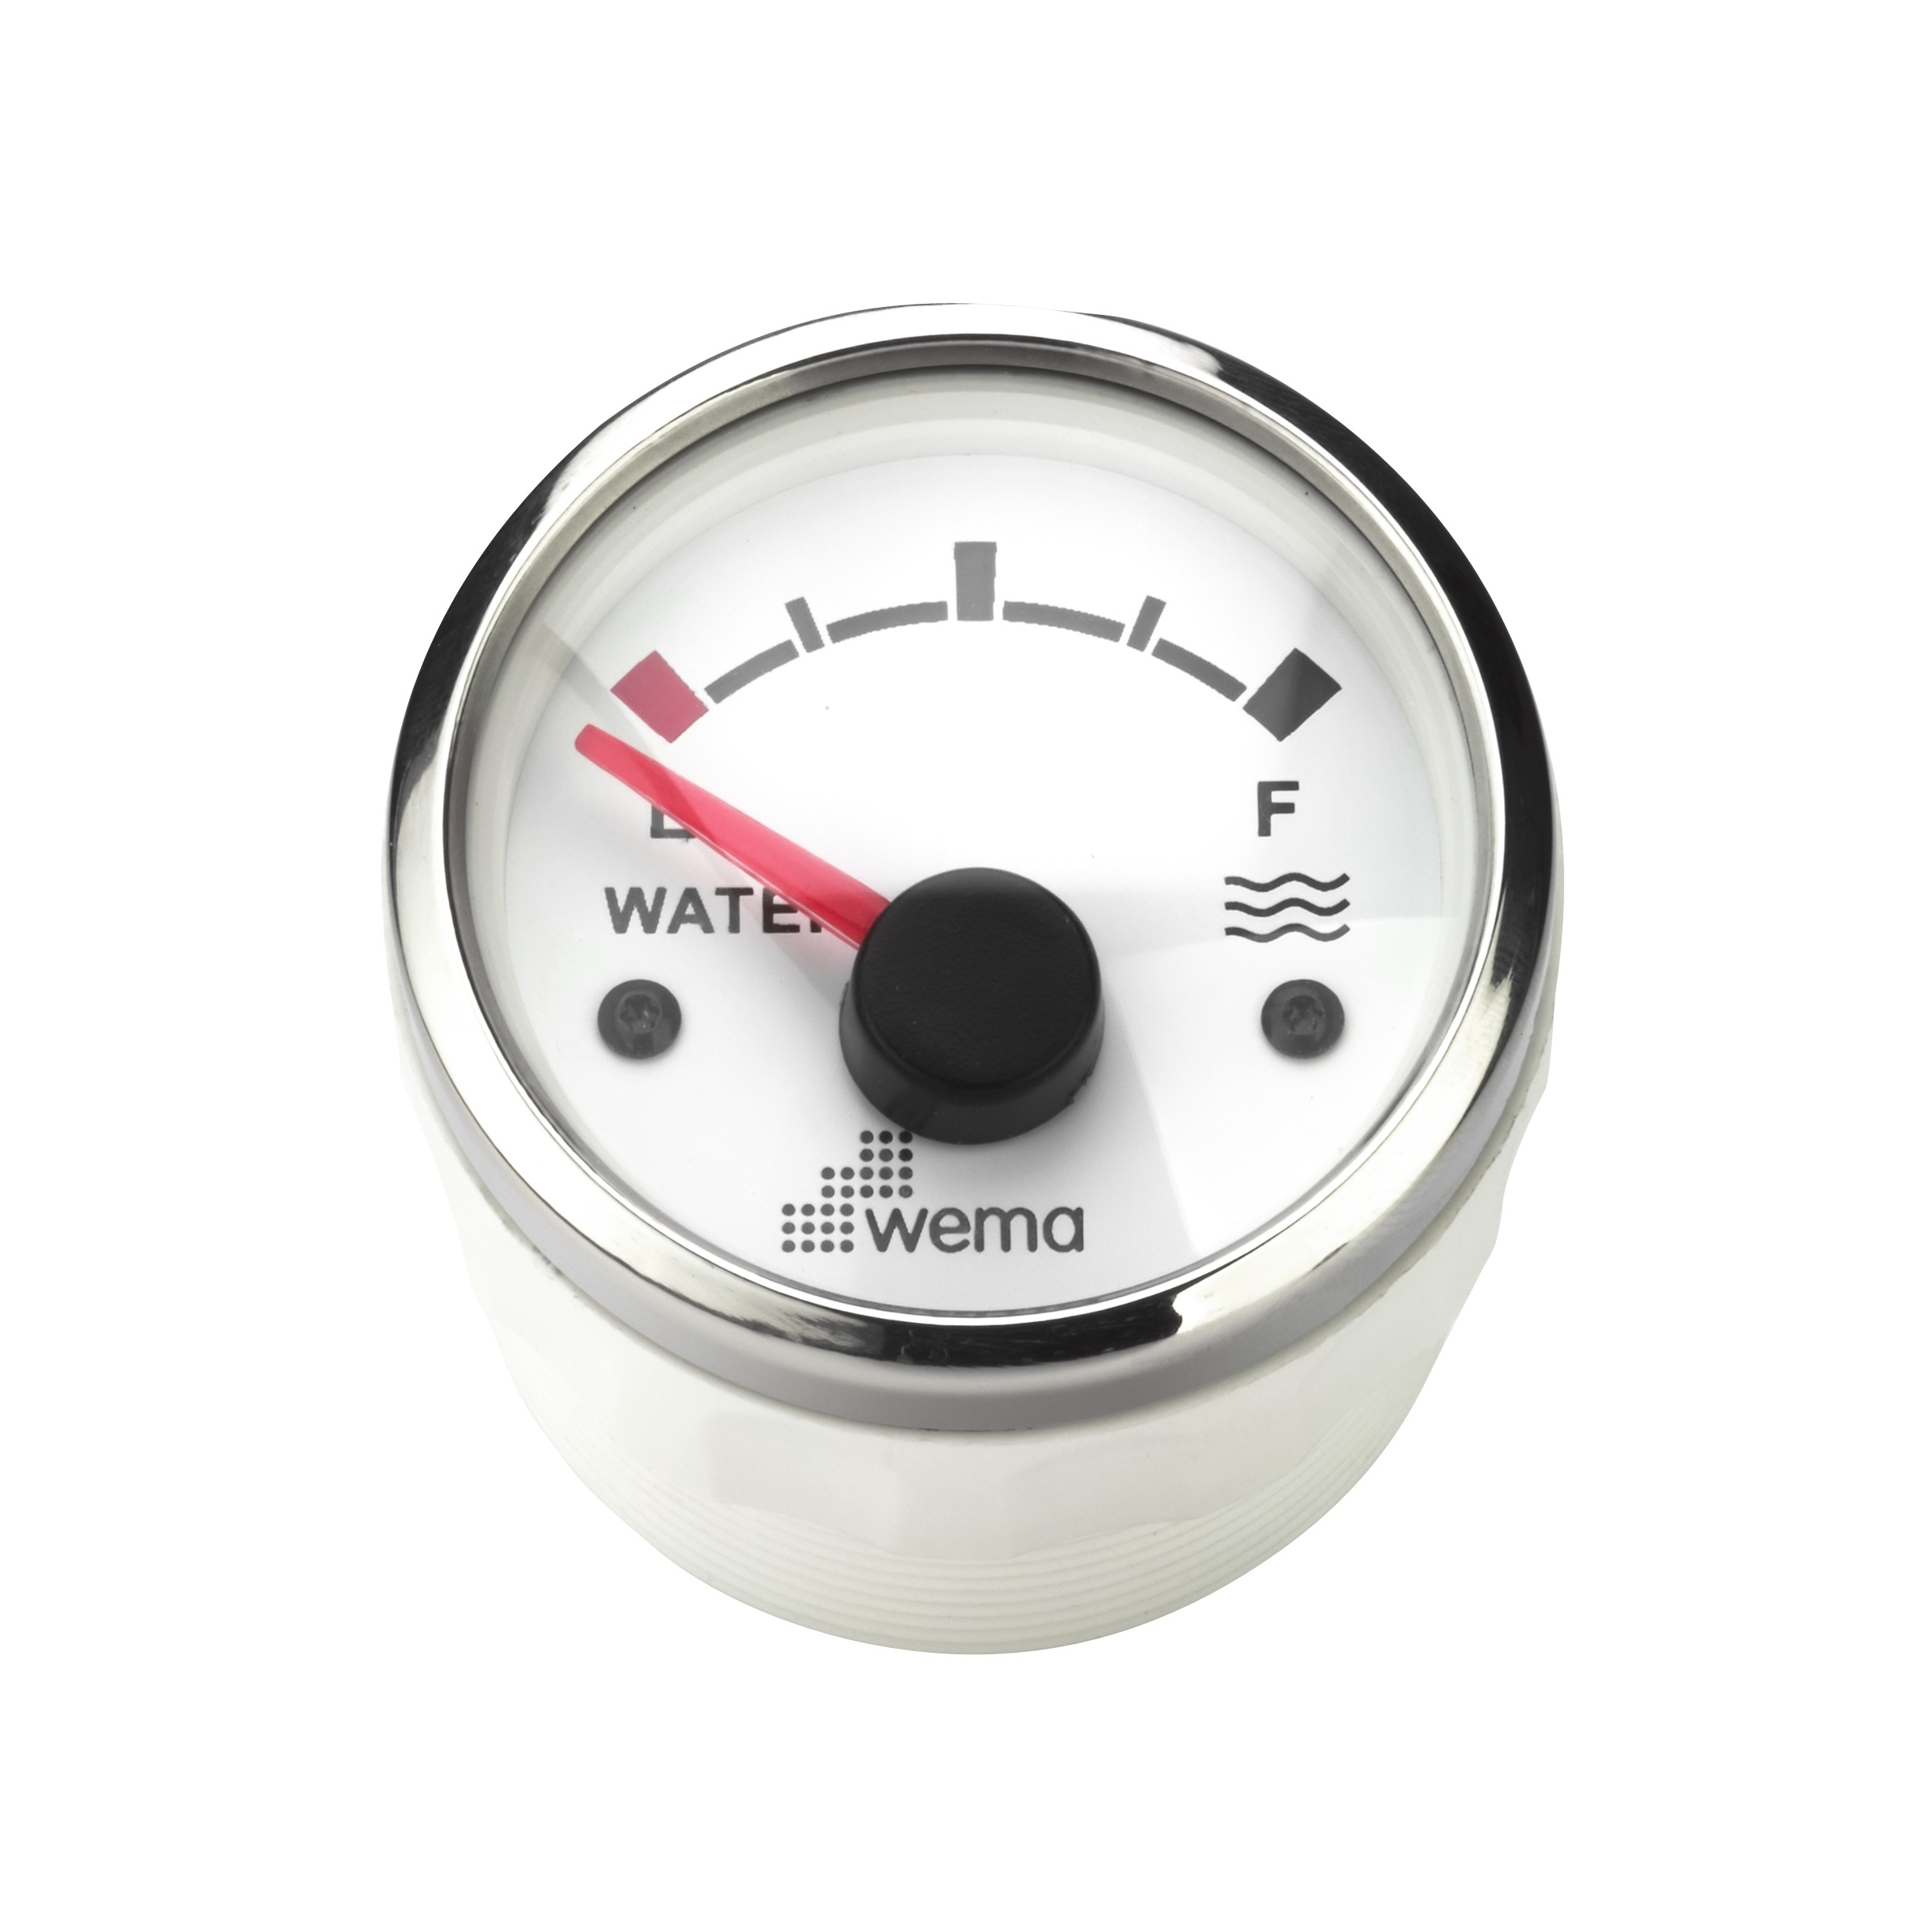 Boat Marine Yacht AS42 Wema Electric Water Gauge For Water Tanks 